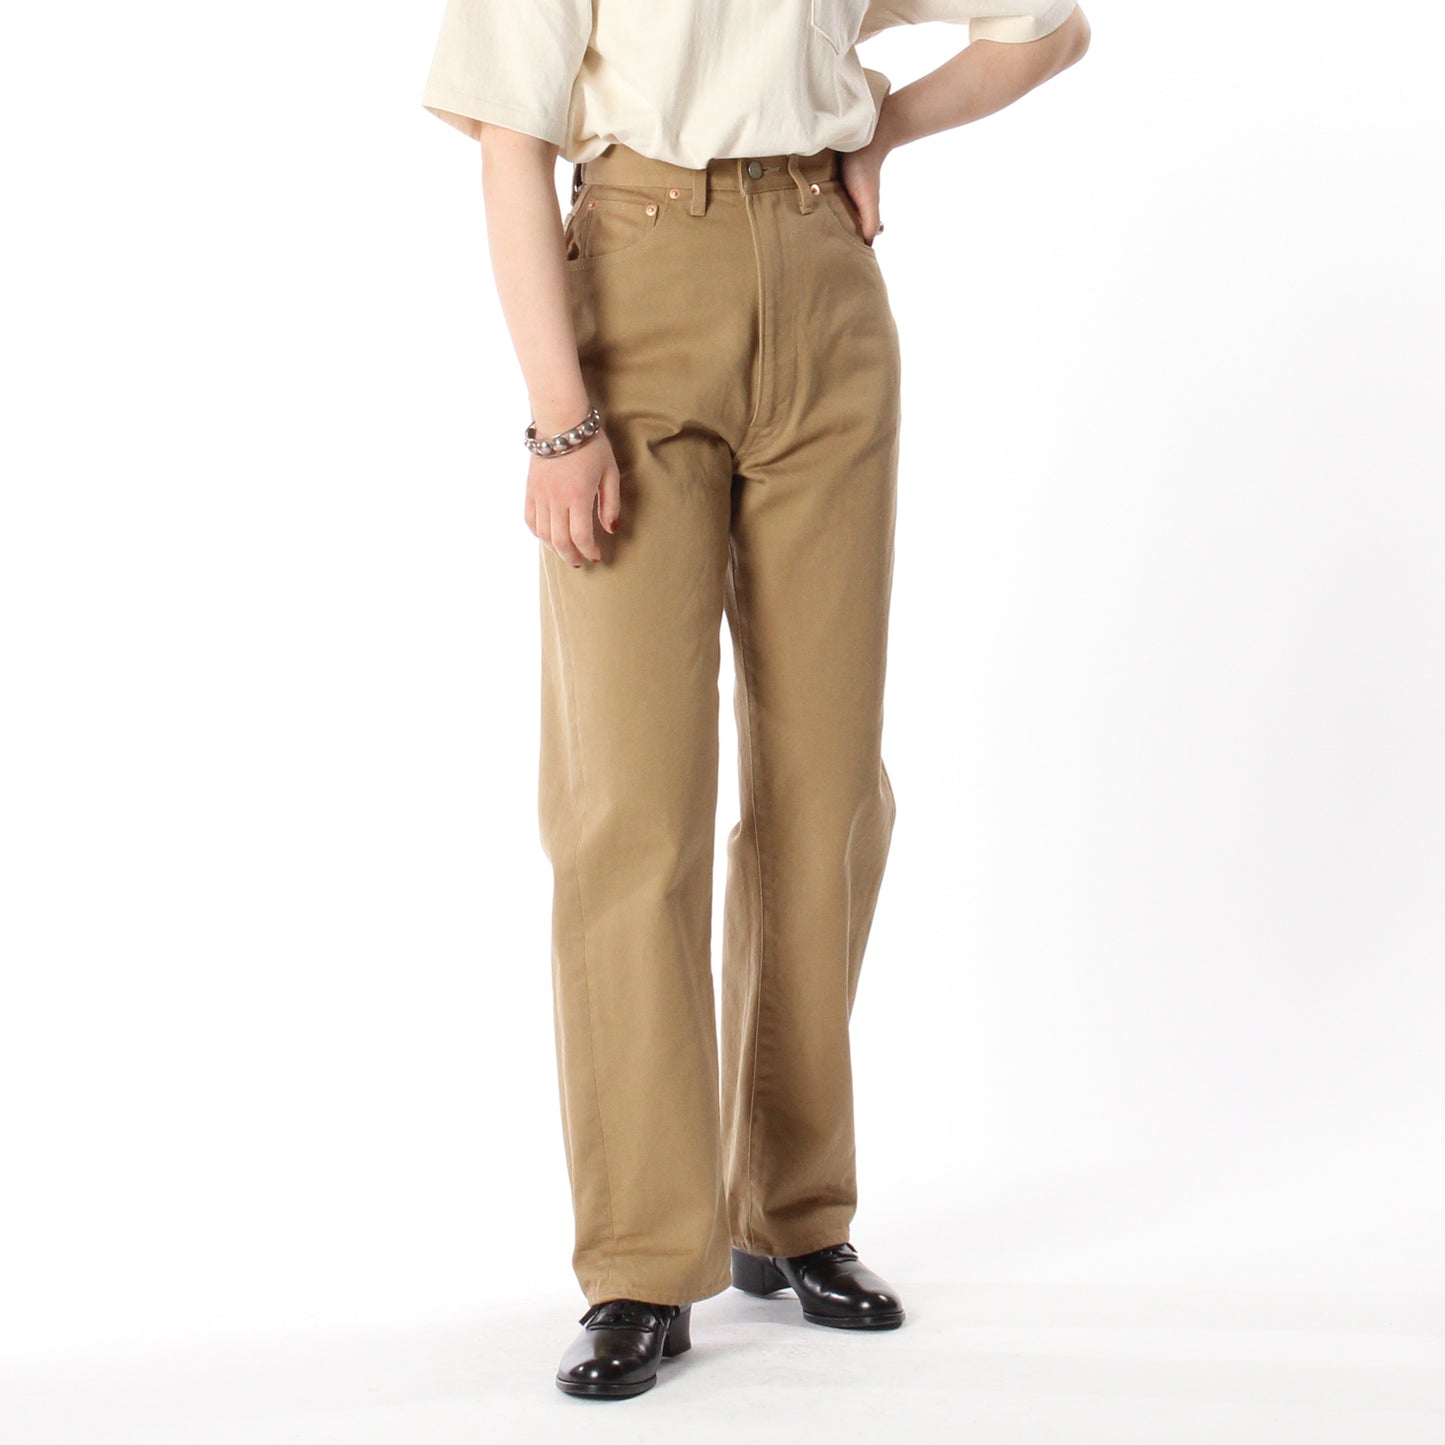 【 LADIES 】ANATOMICA 618 MARILYN DRILL / SABLE